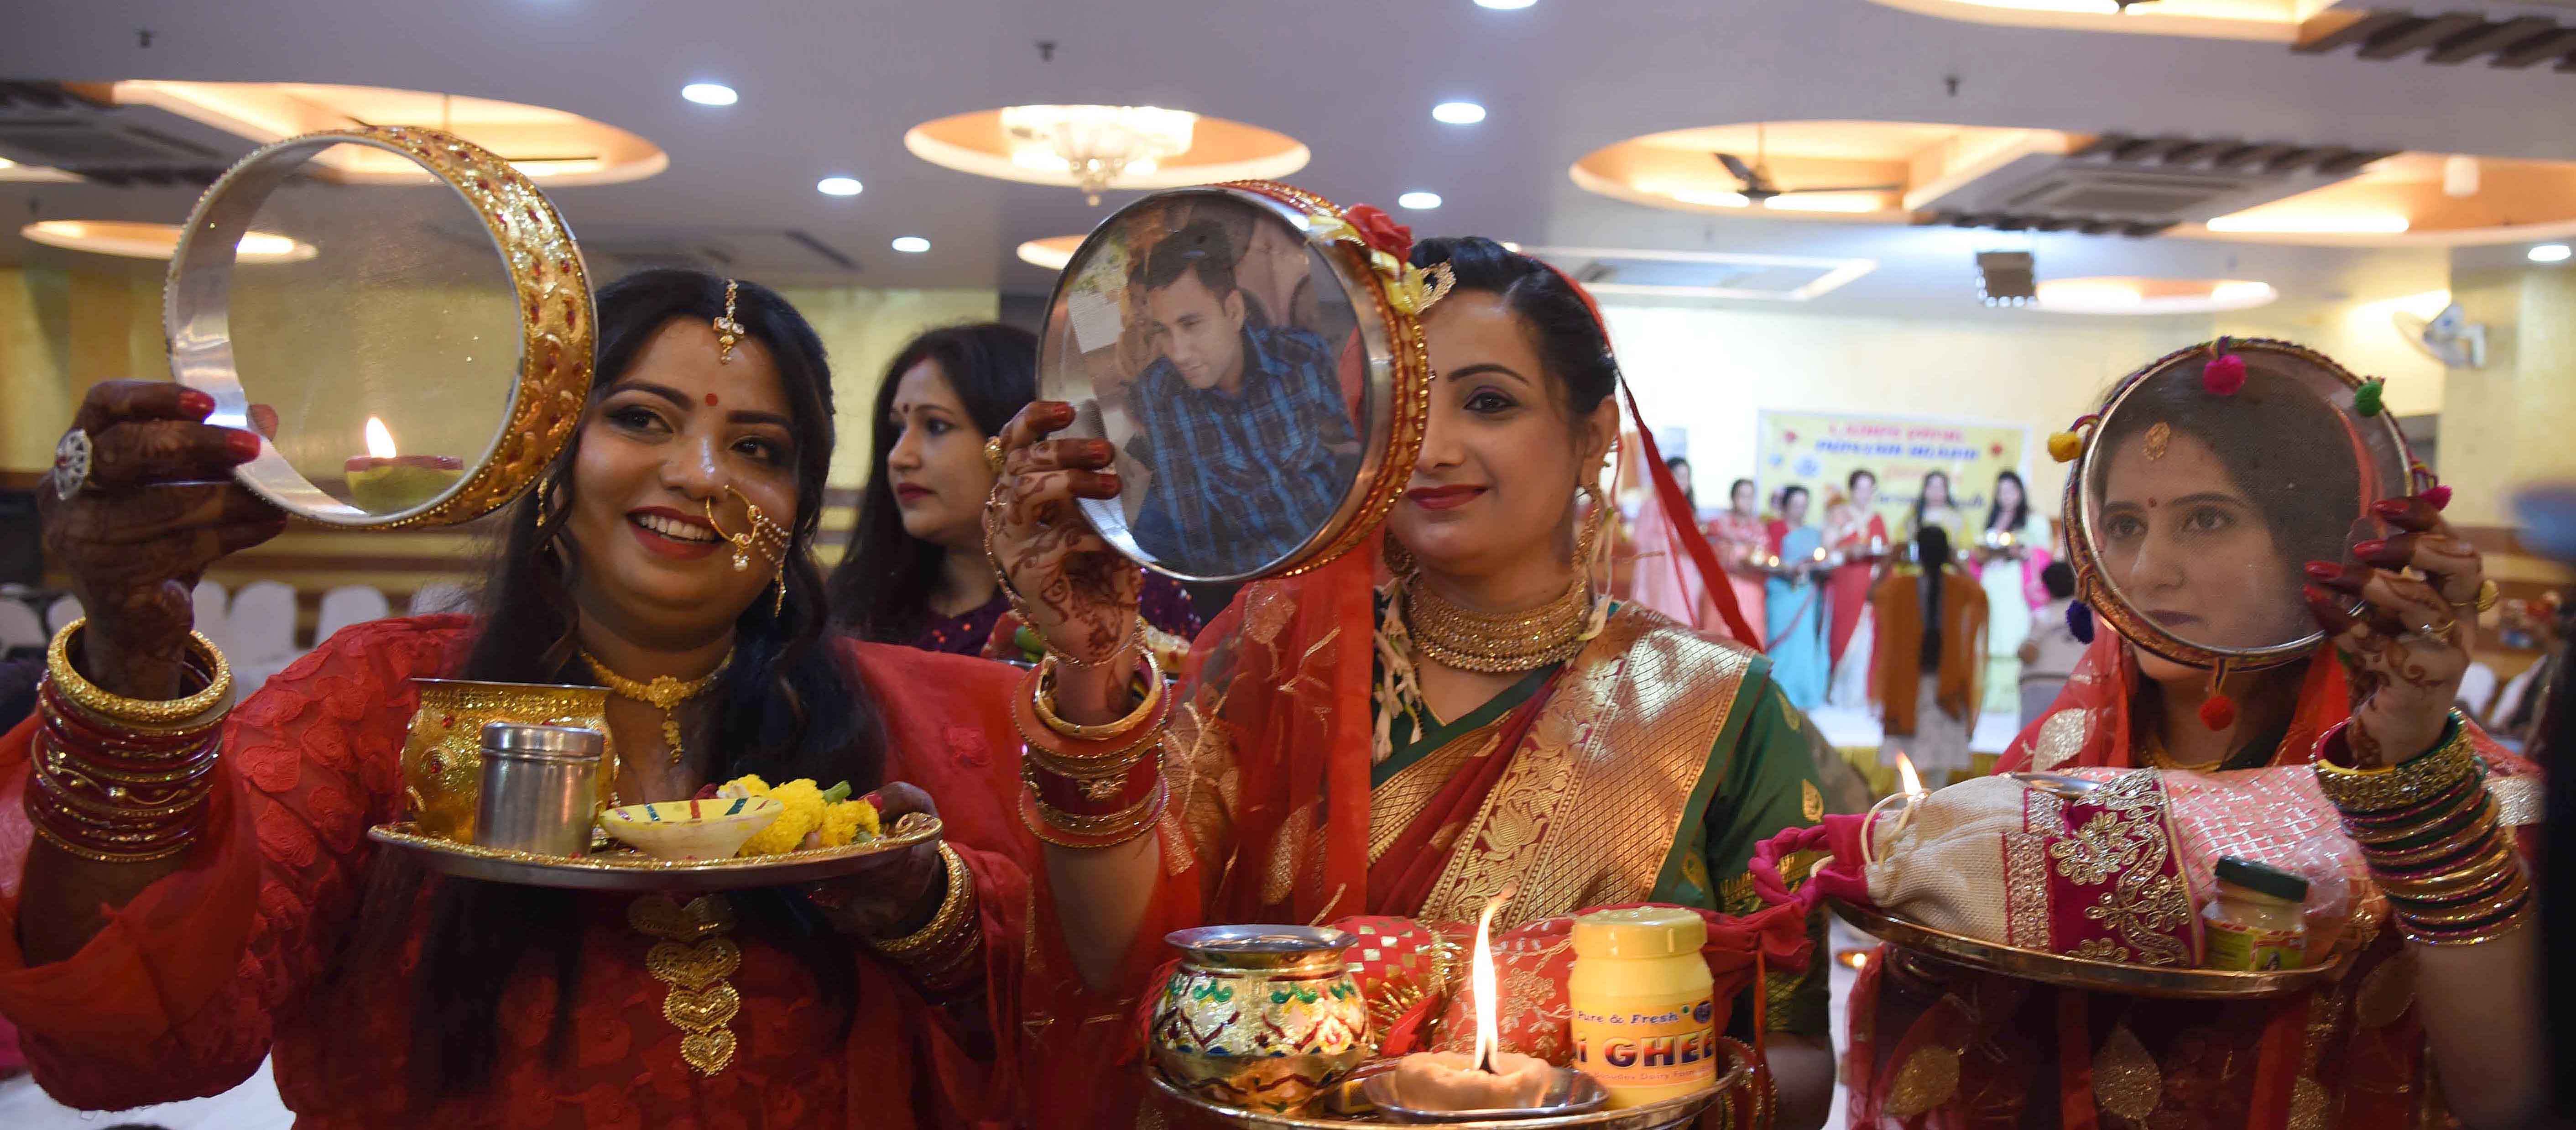 Married women perform rituals on the occasion of Karwa Chauth in Patna - IANS